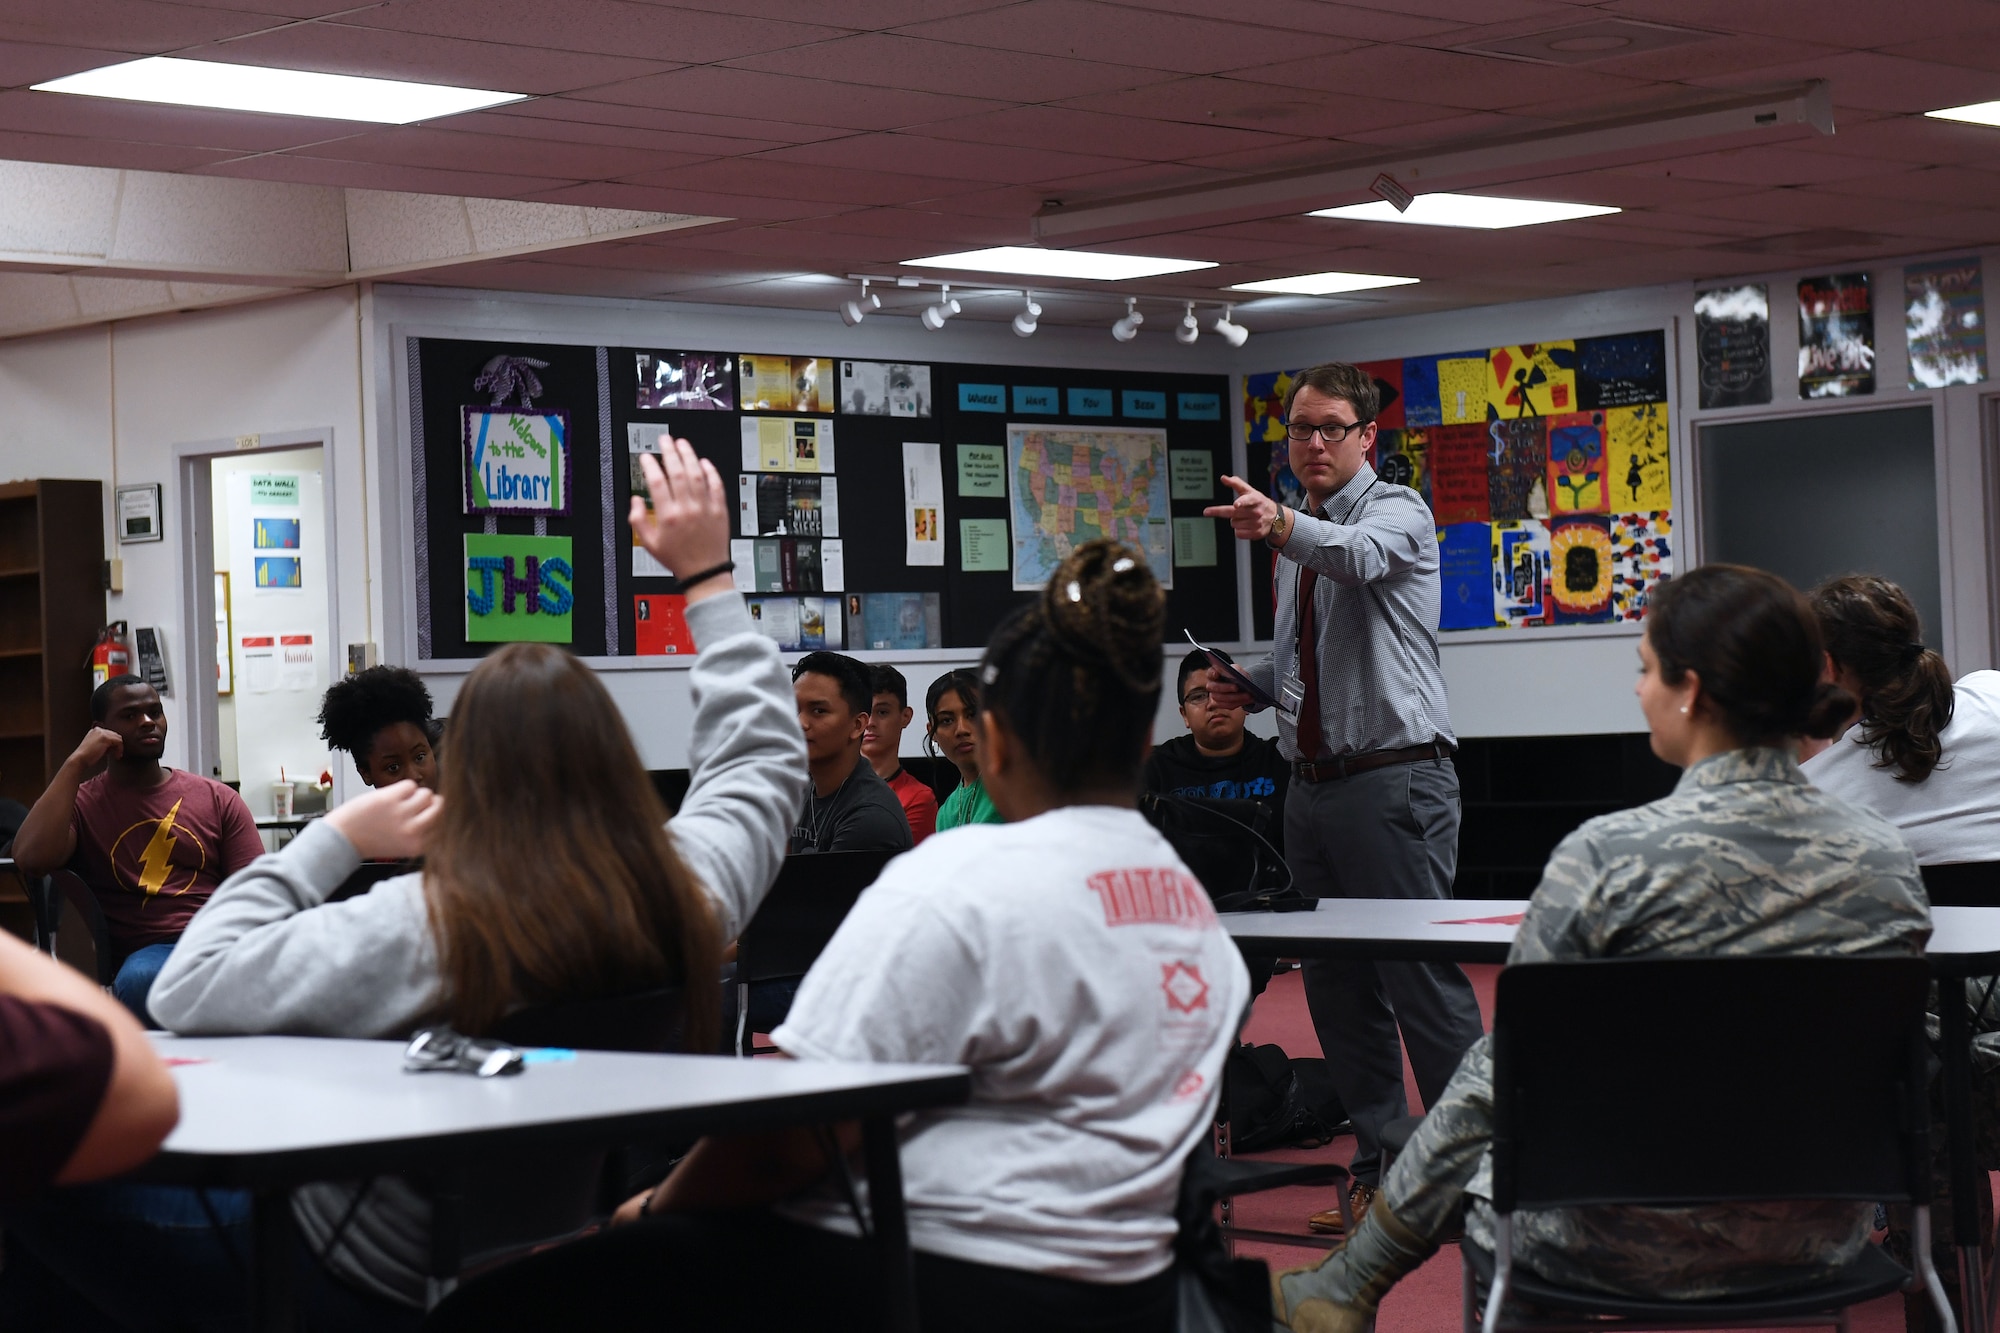 A student raises their hand in the classroom